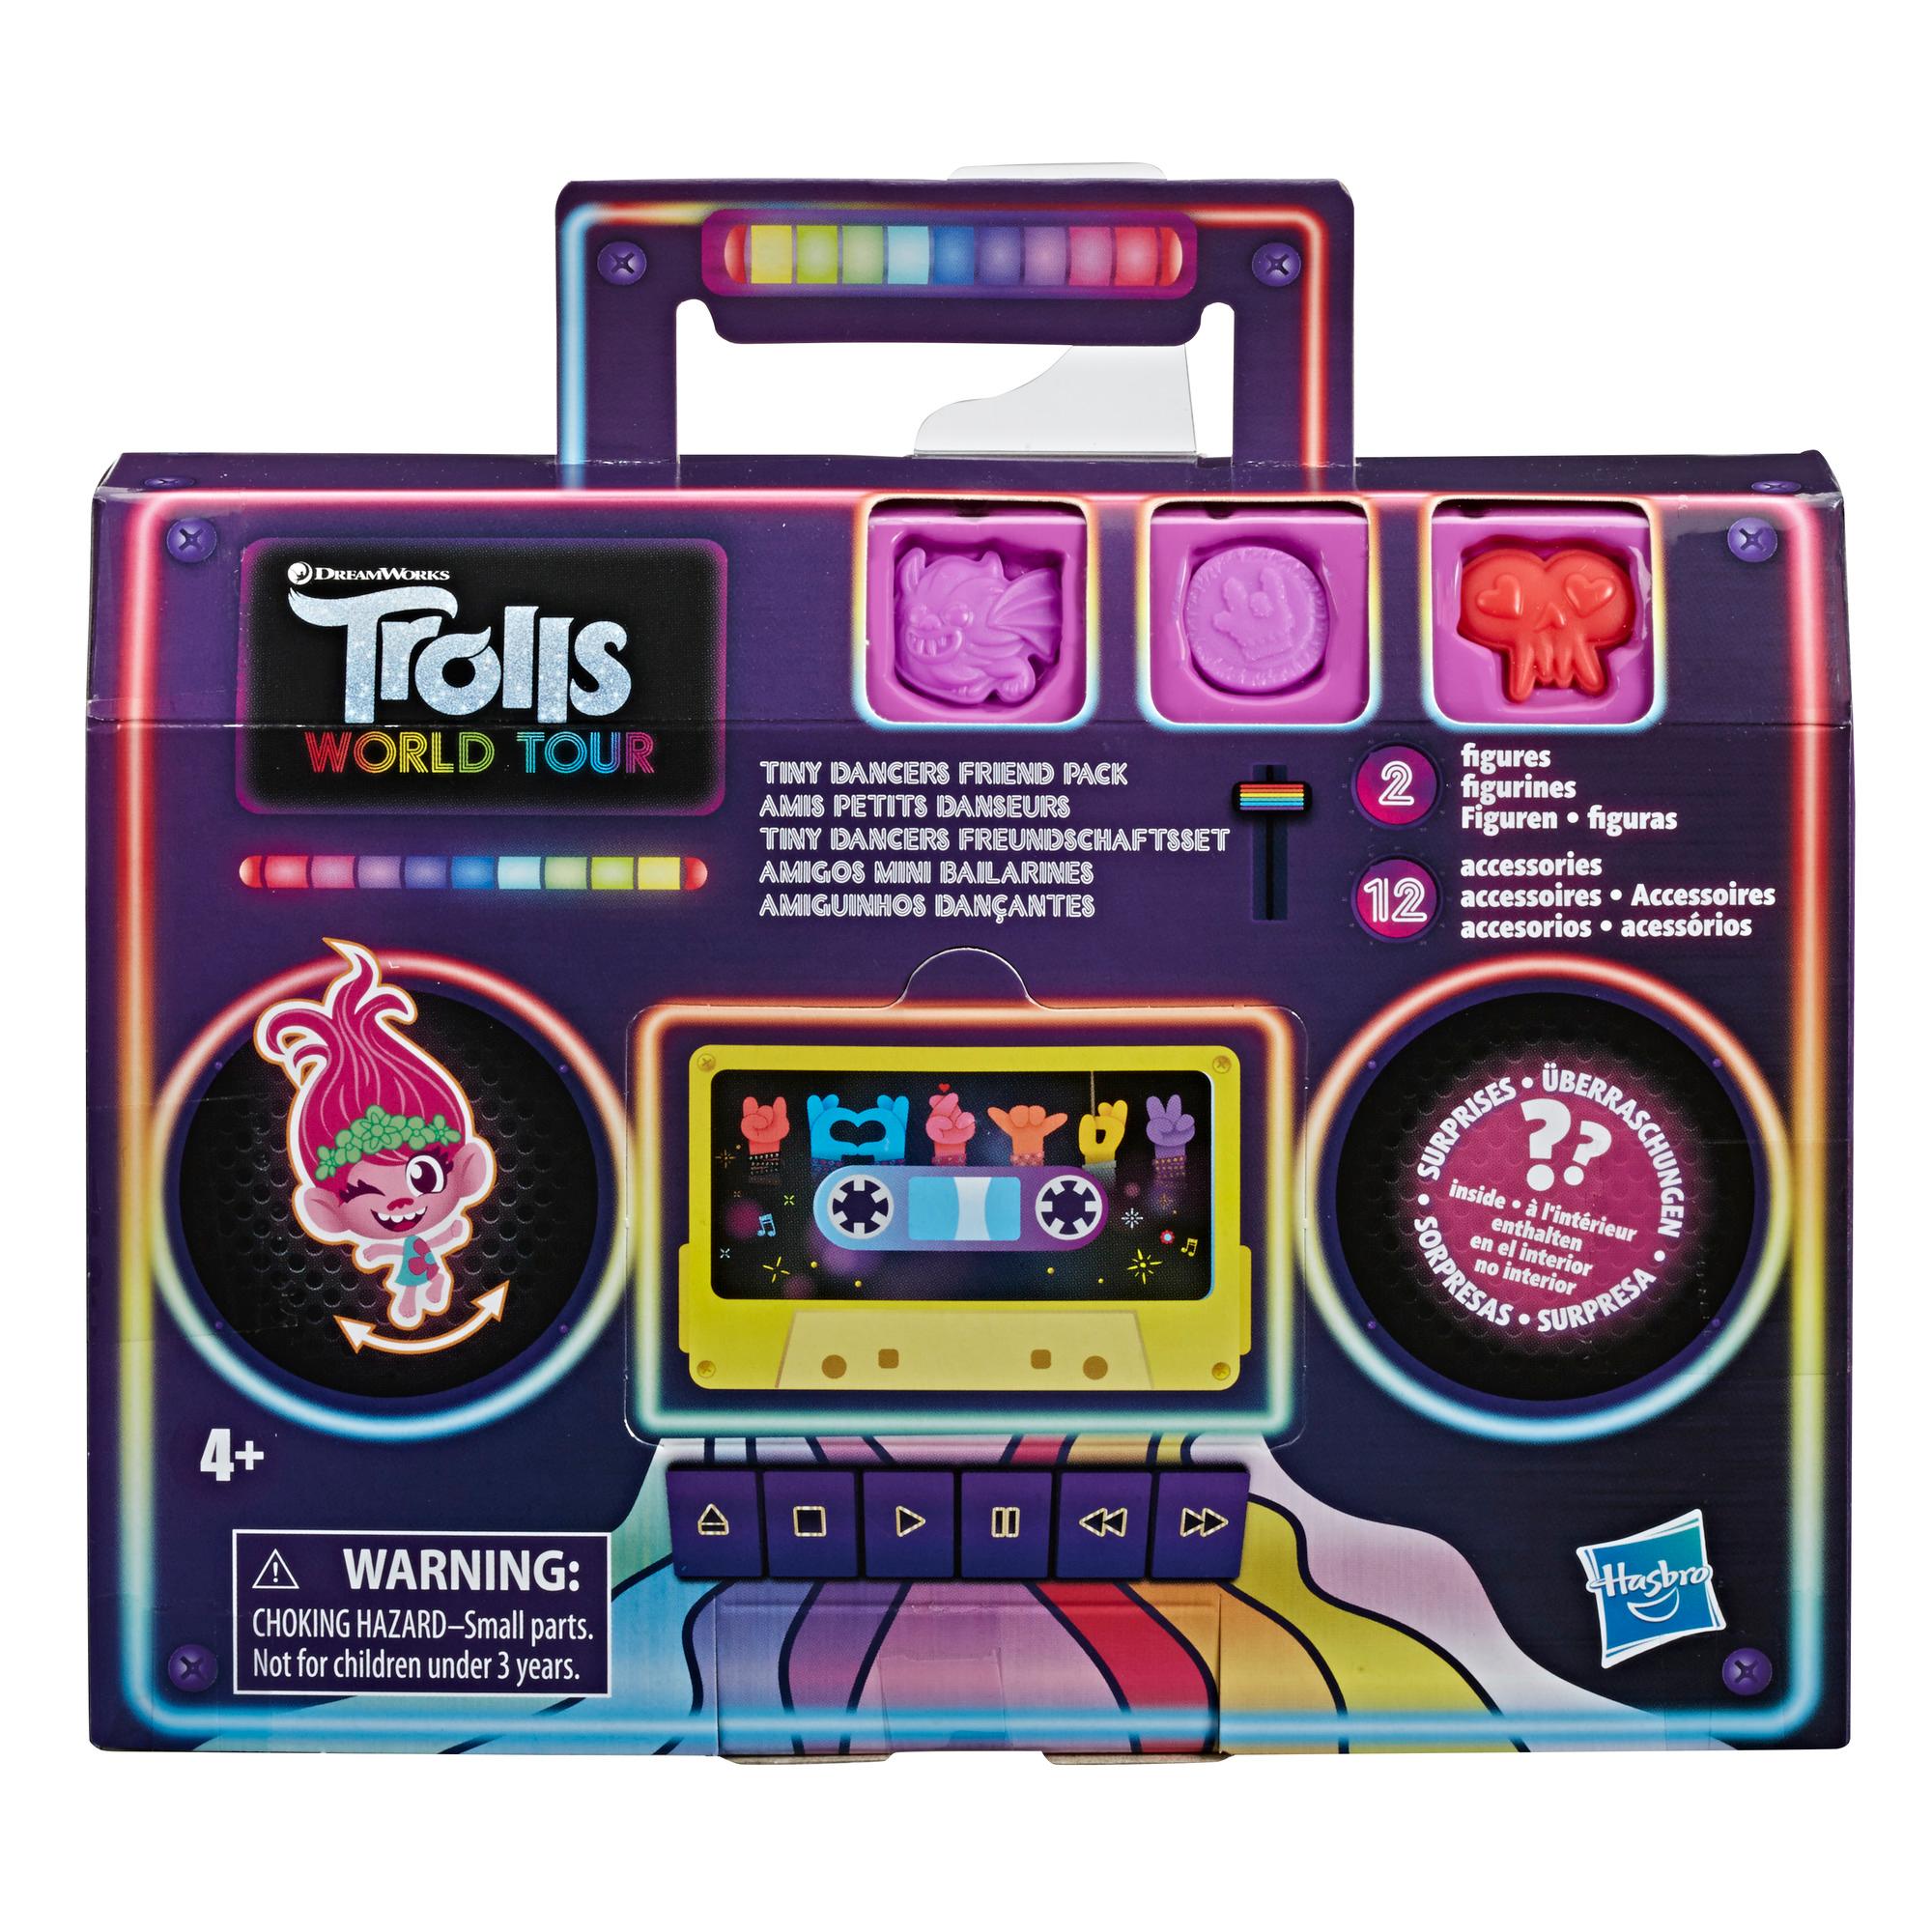 DreamWorks Trolls Tiny Dancers Friend Pack with 2 Tiny Dancers Figures, 2 bracelets, and 10 Charms, Inspired by the Movie Trolls World Tour